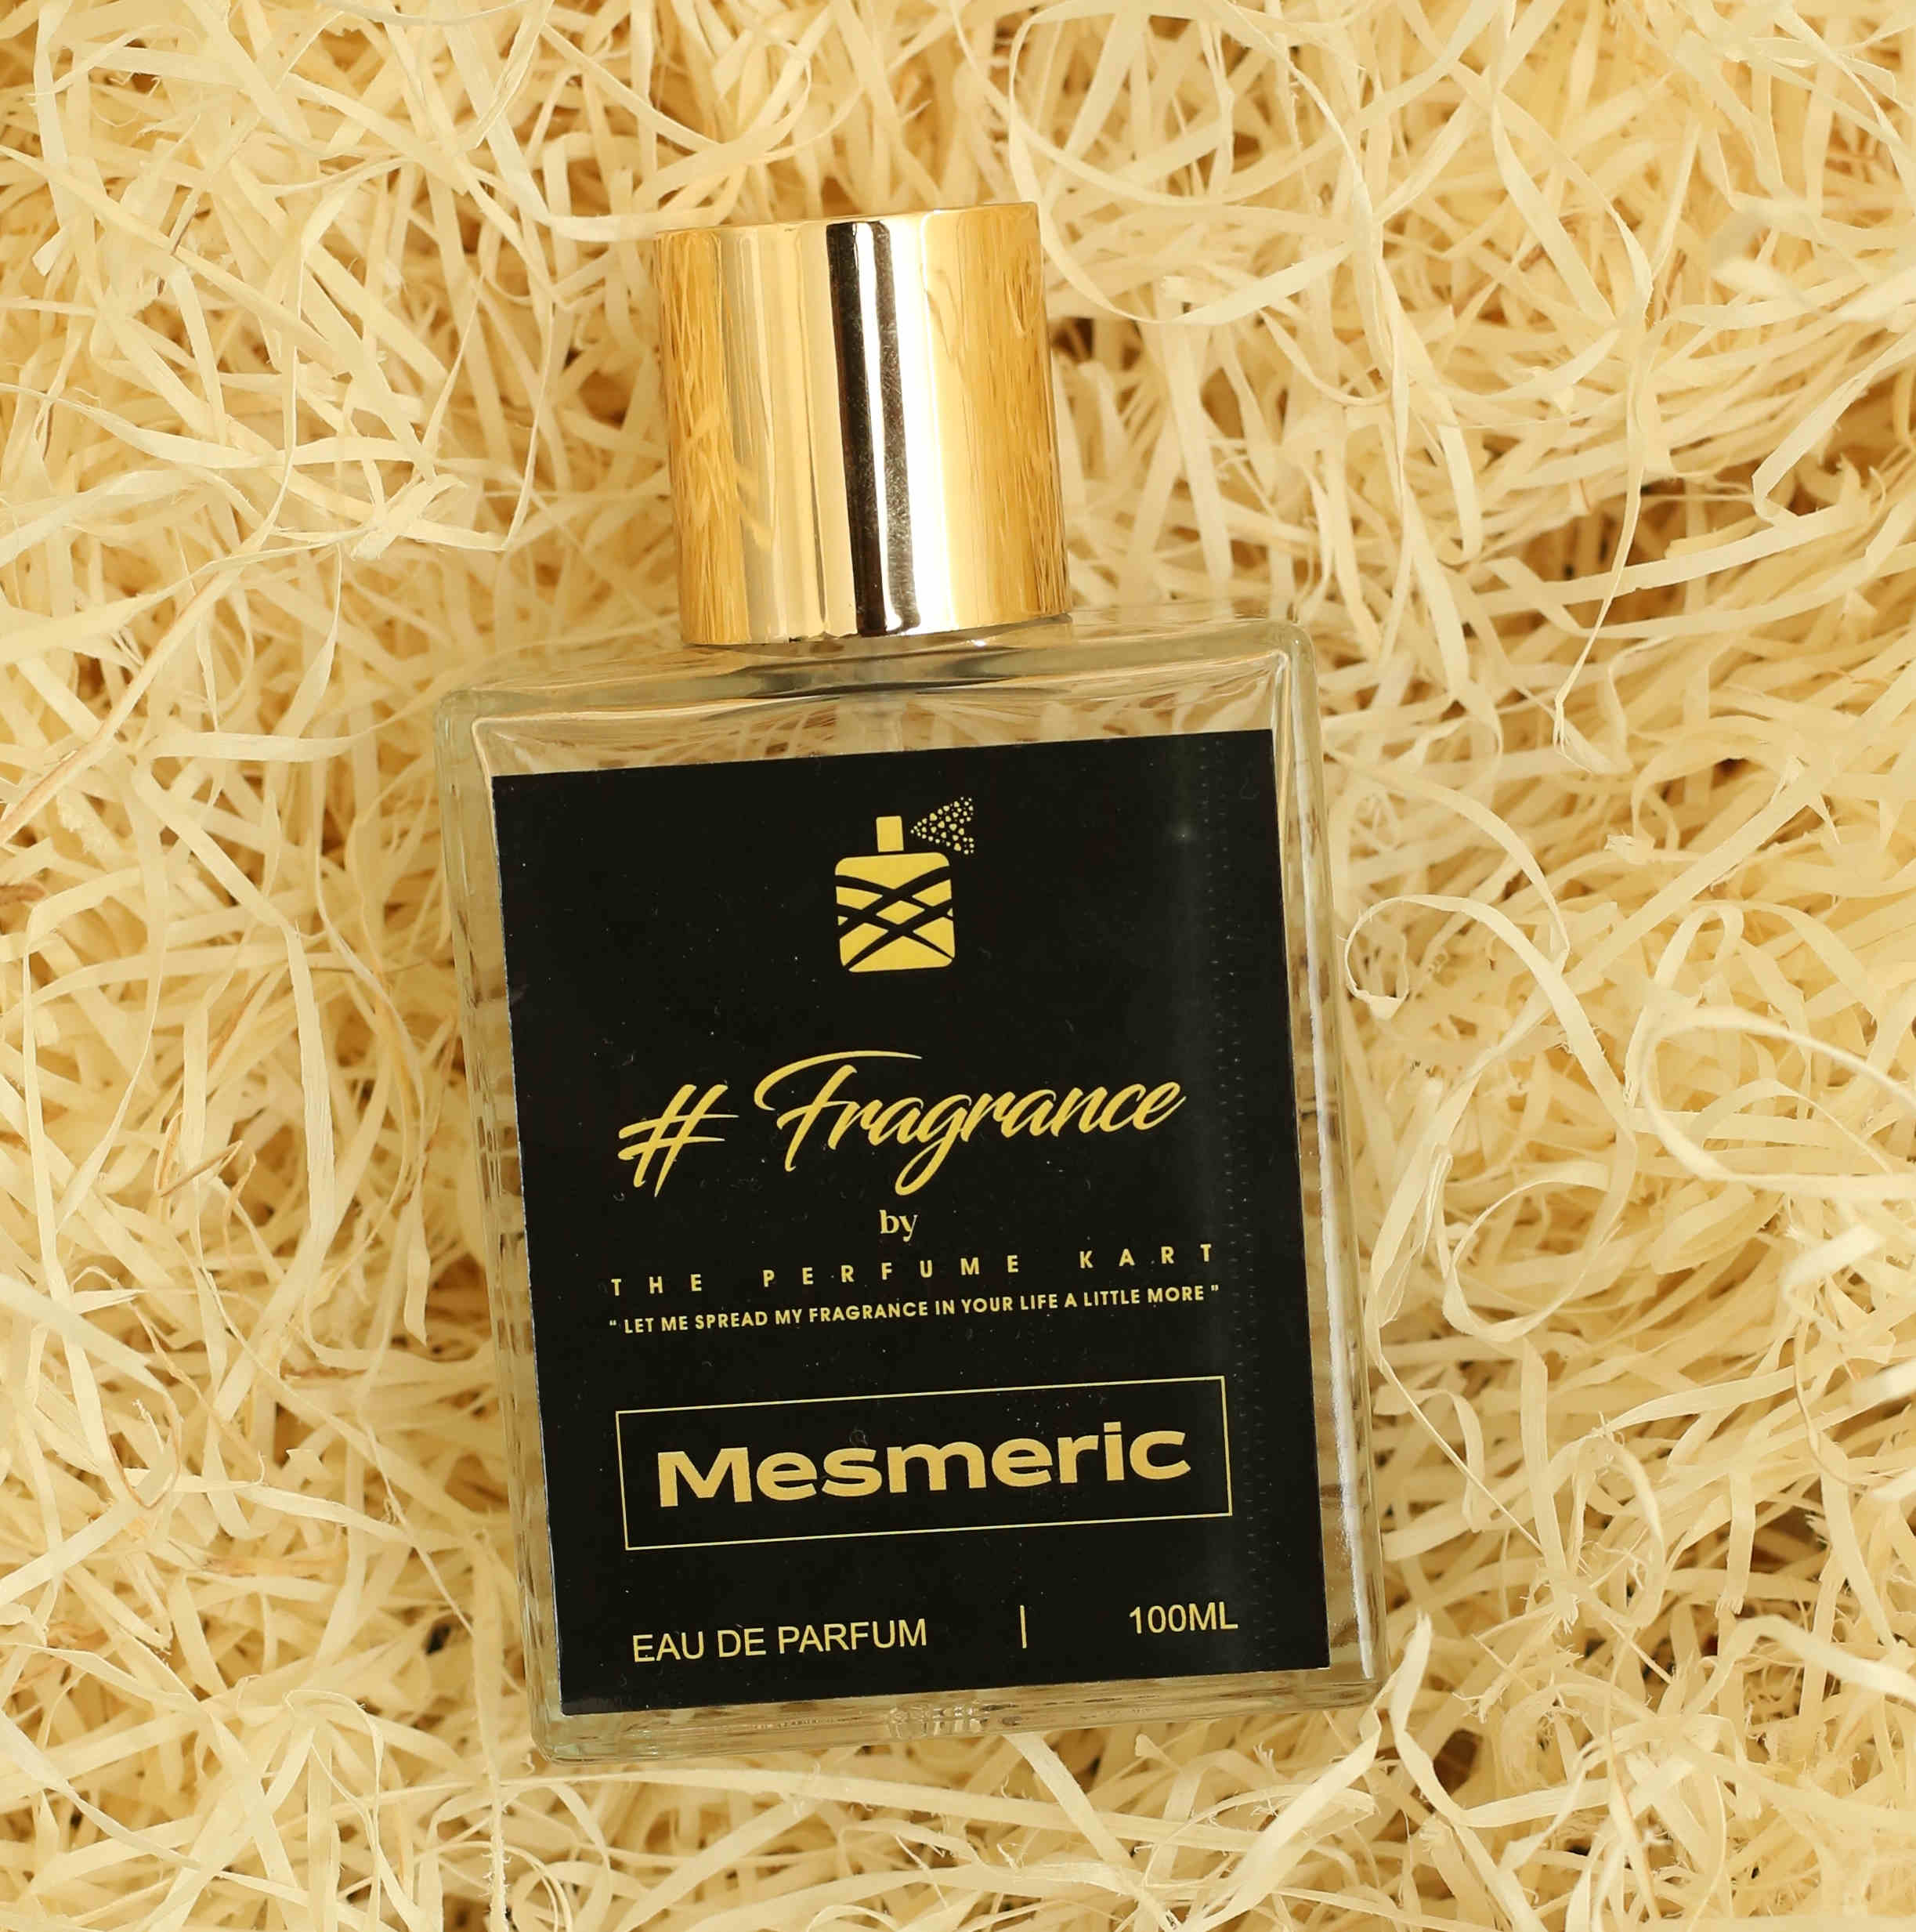 mesmeric woman perfume, best perfume for her, luxury perfume for her